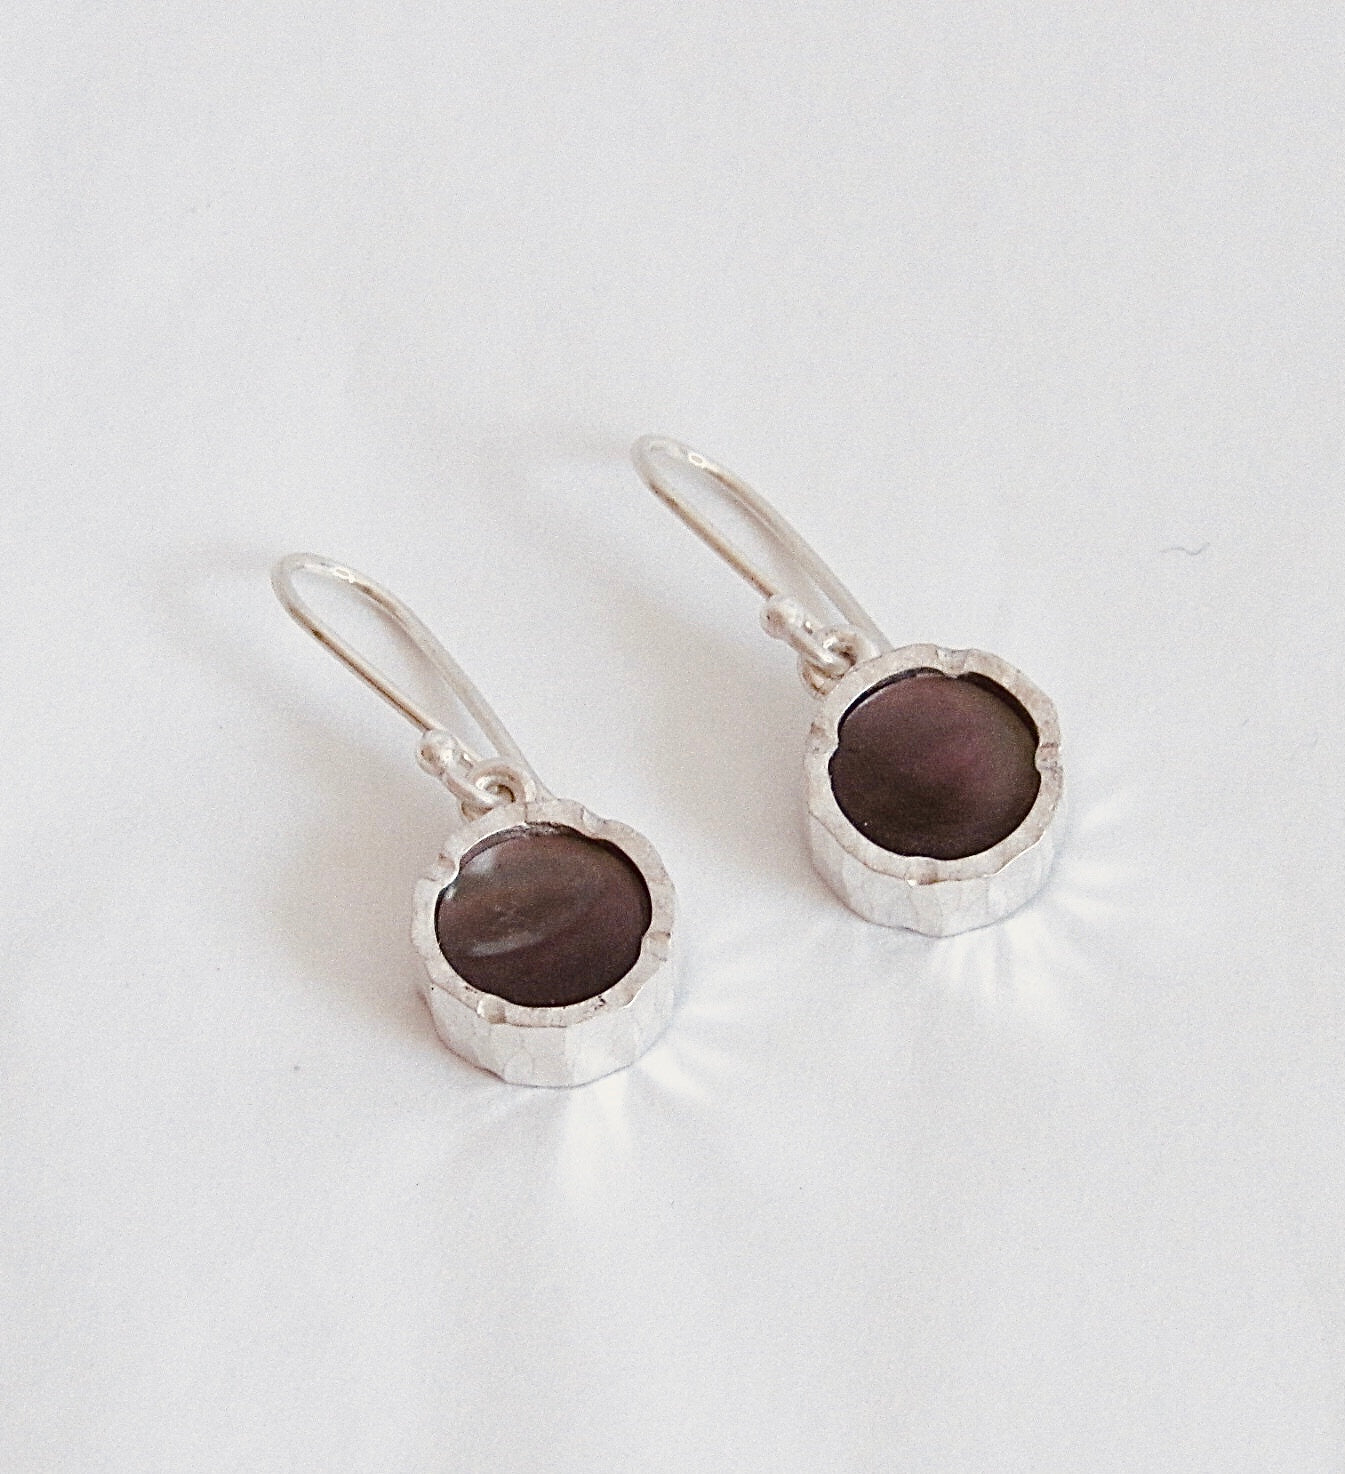 Black lipped Mother of Pearl Earrings